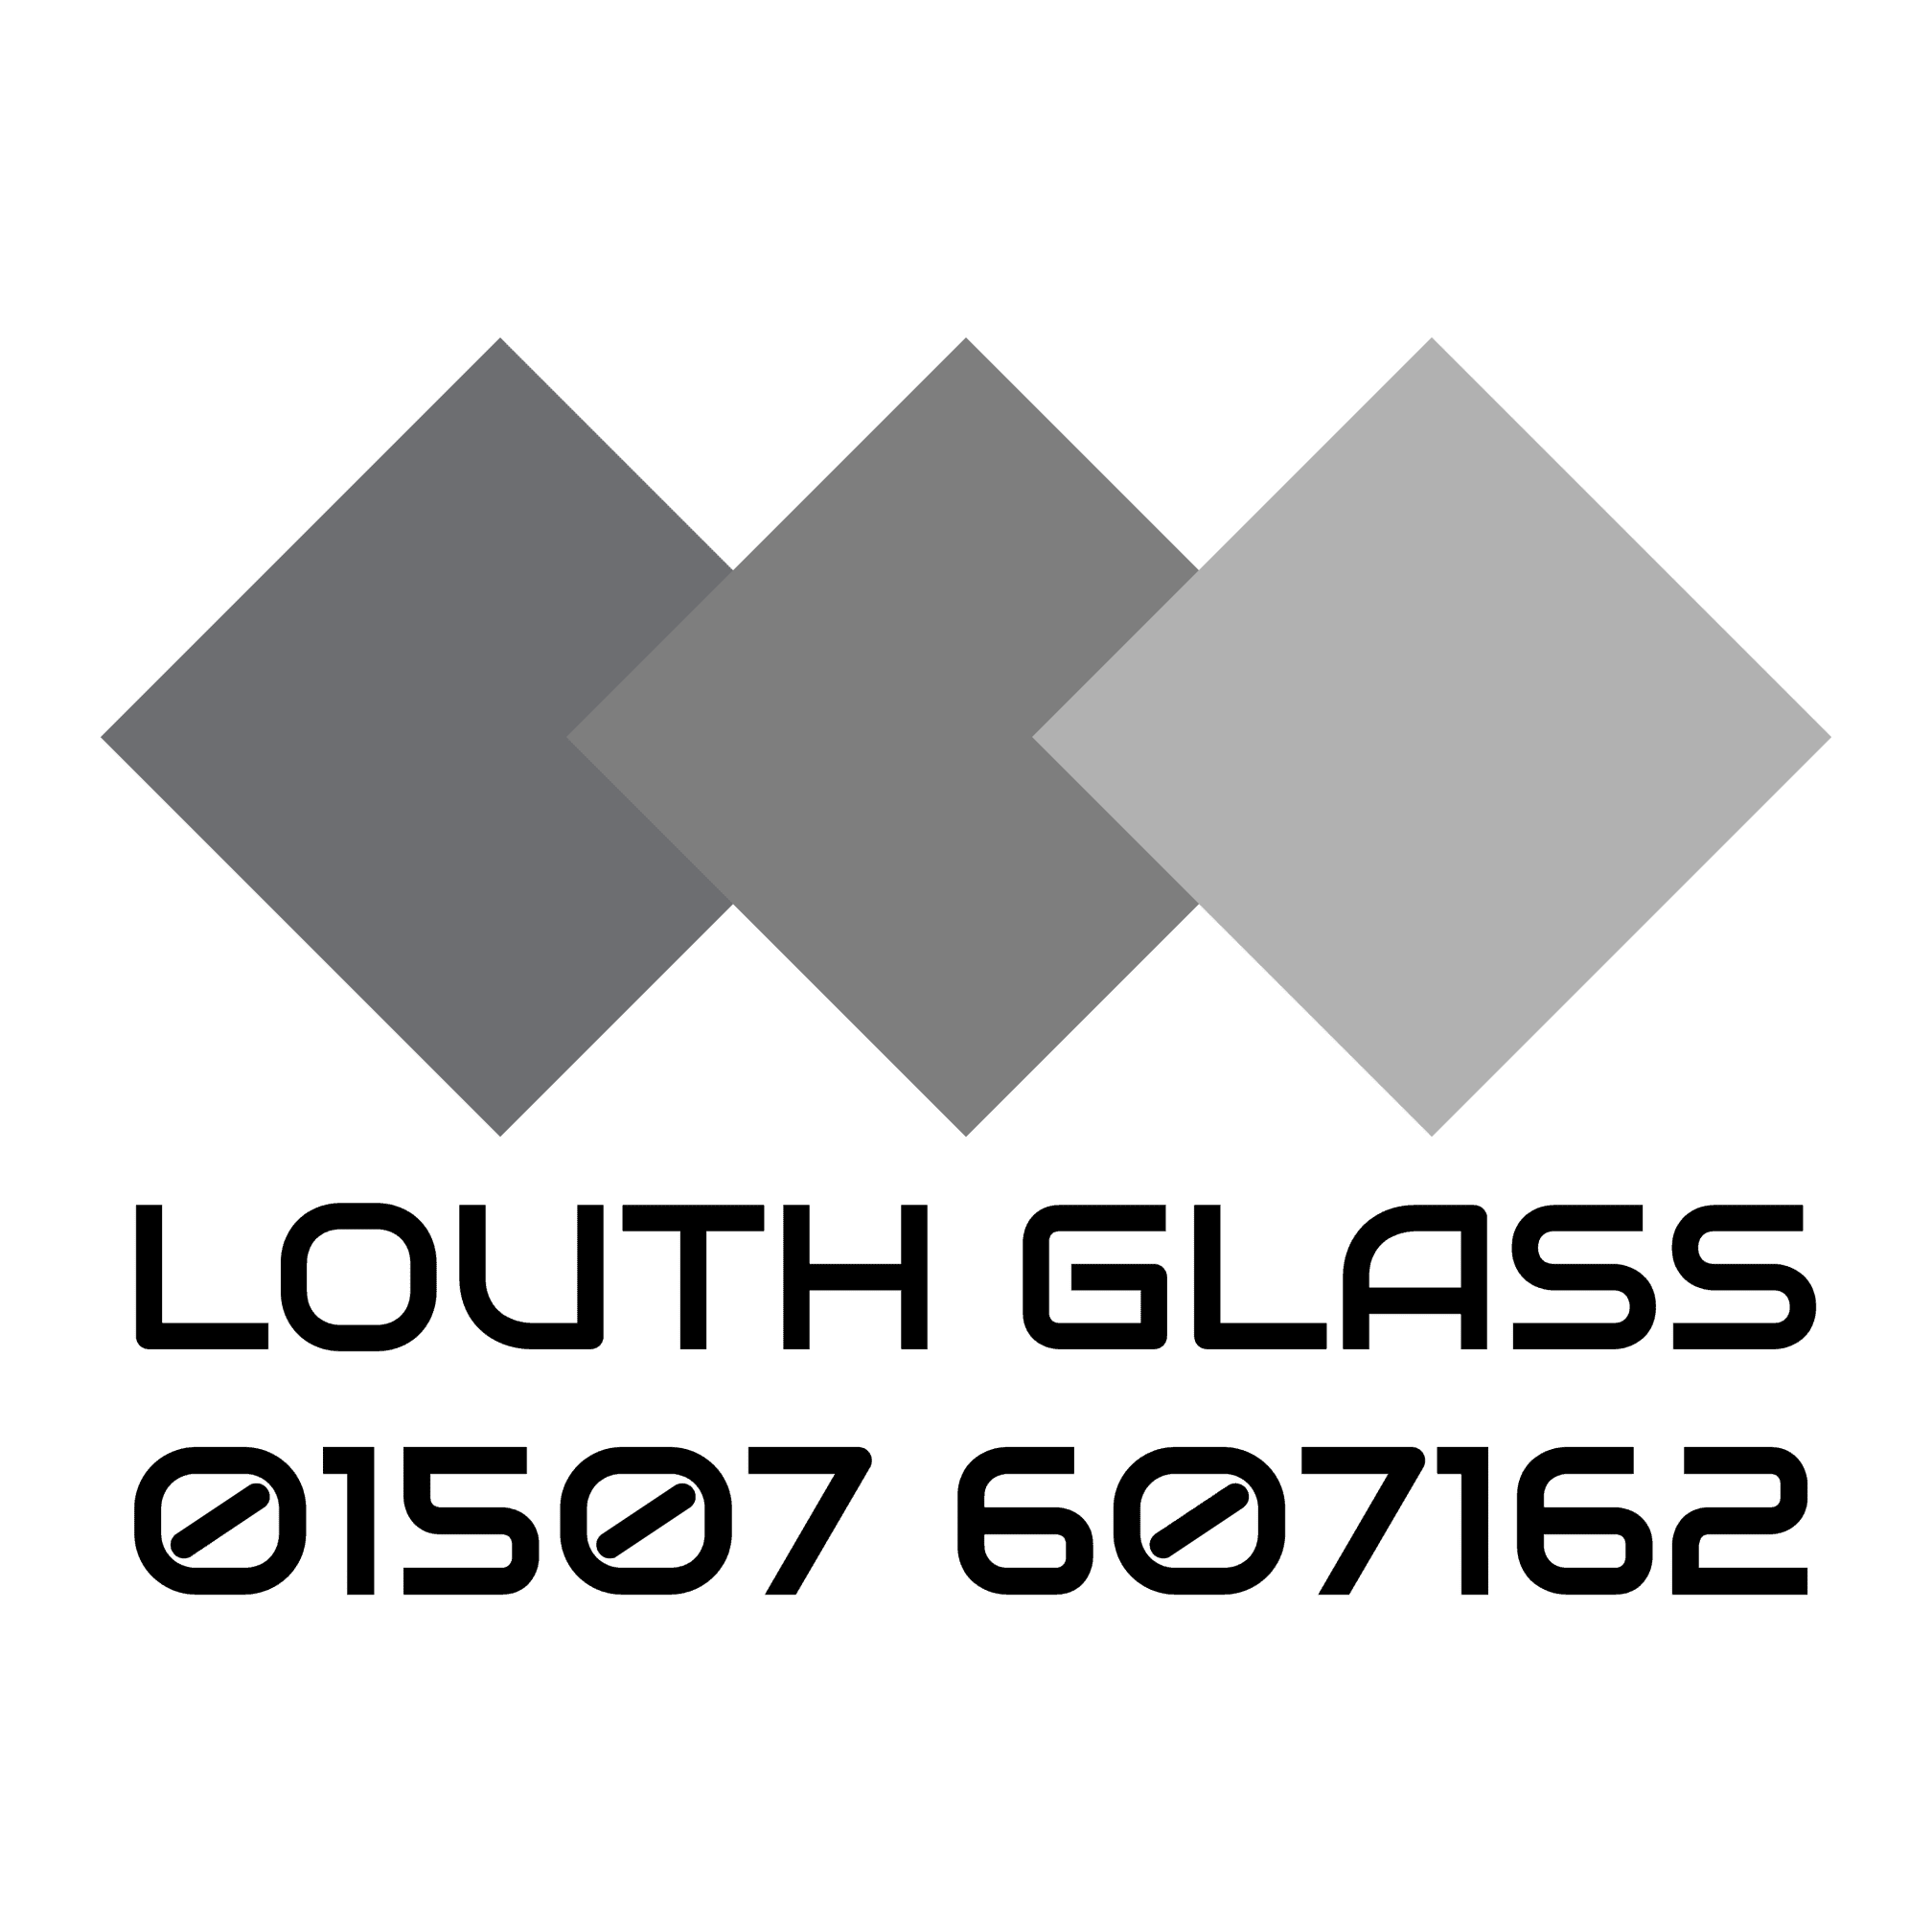 Louth Glass Ltd Louth 01507 607162